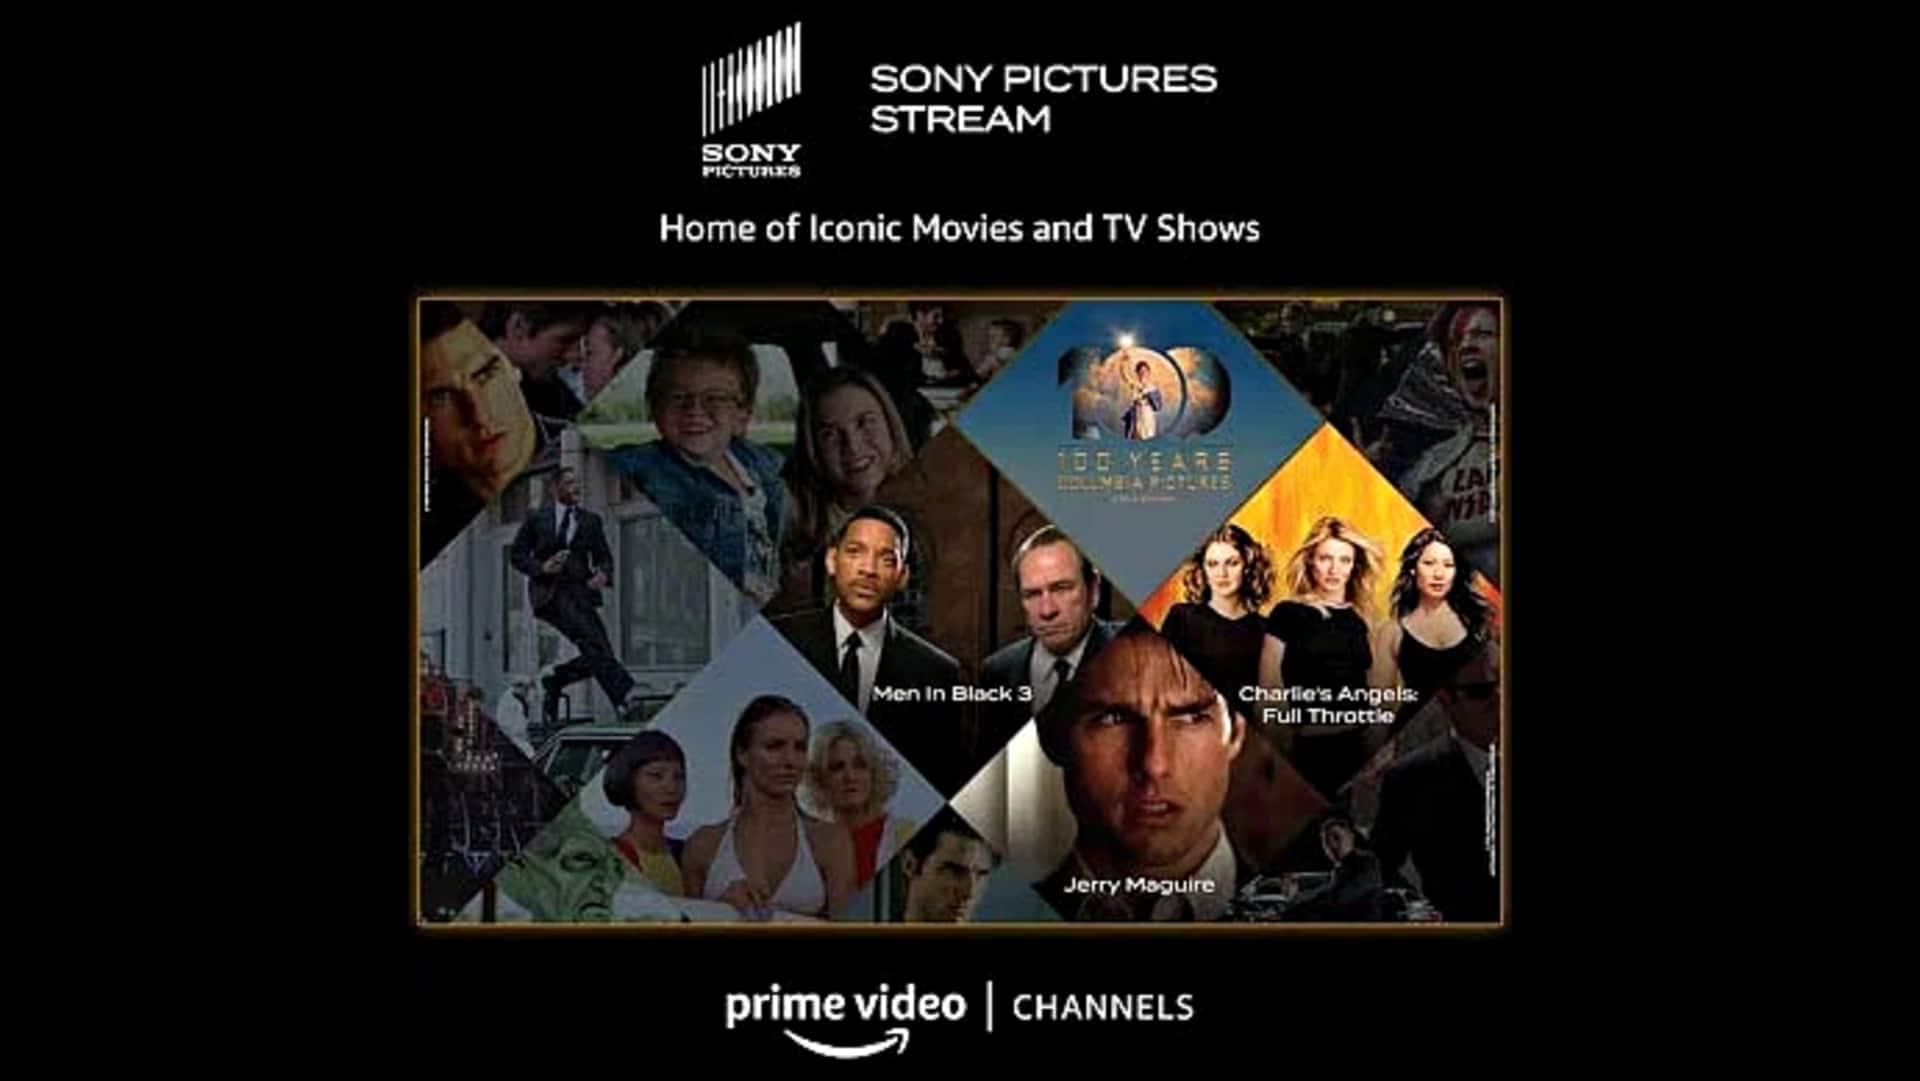 Sony Pictures launches OTT service on Prime Video in India